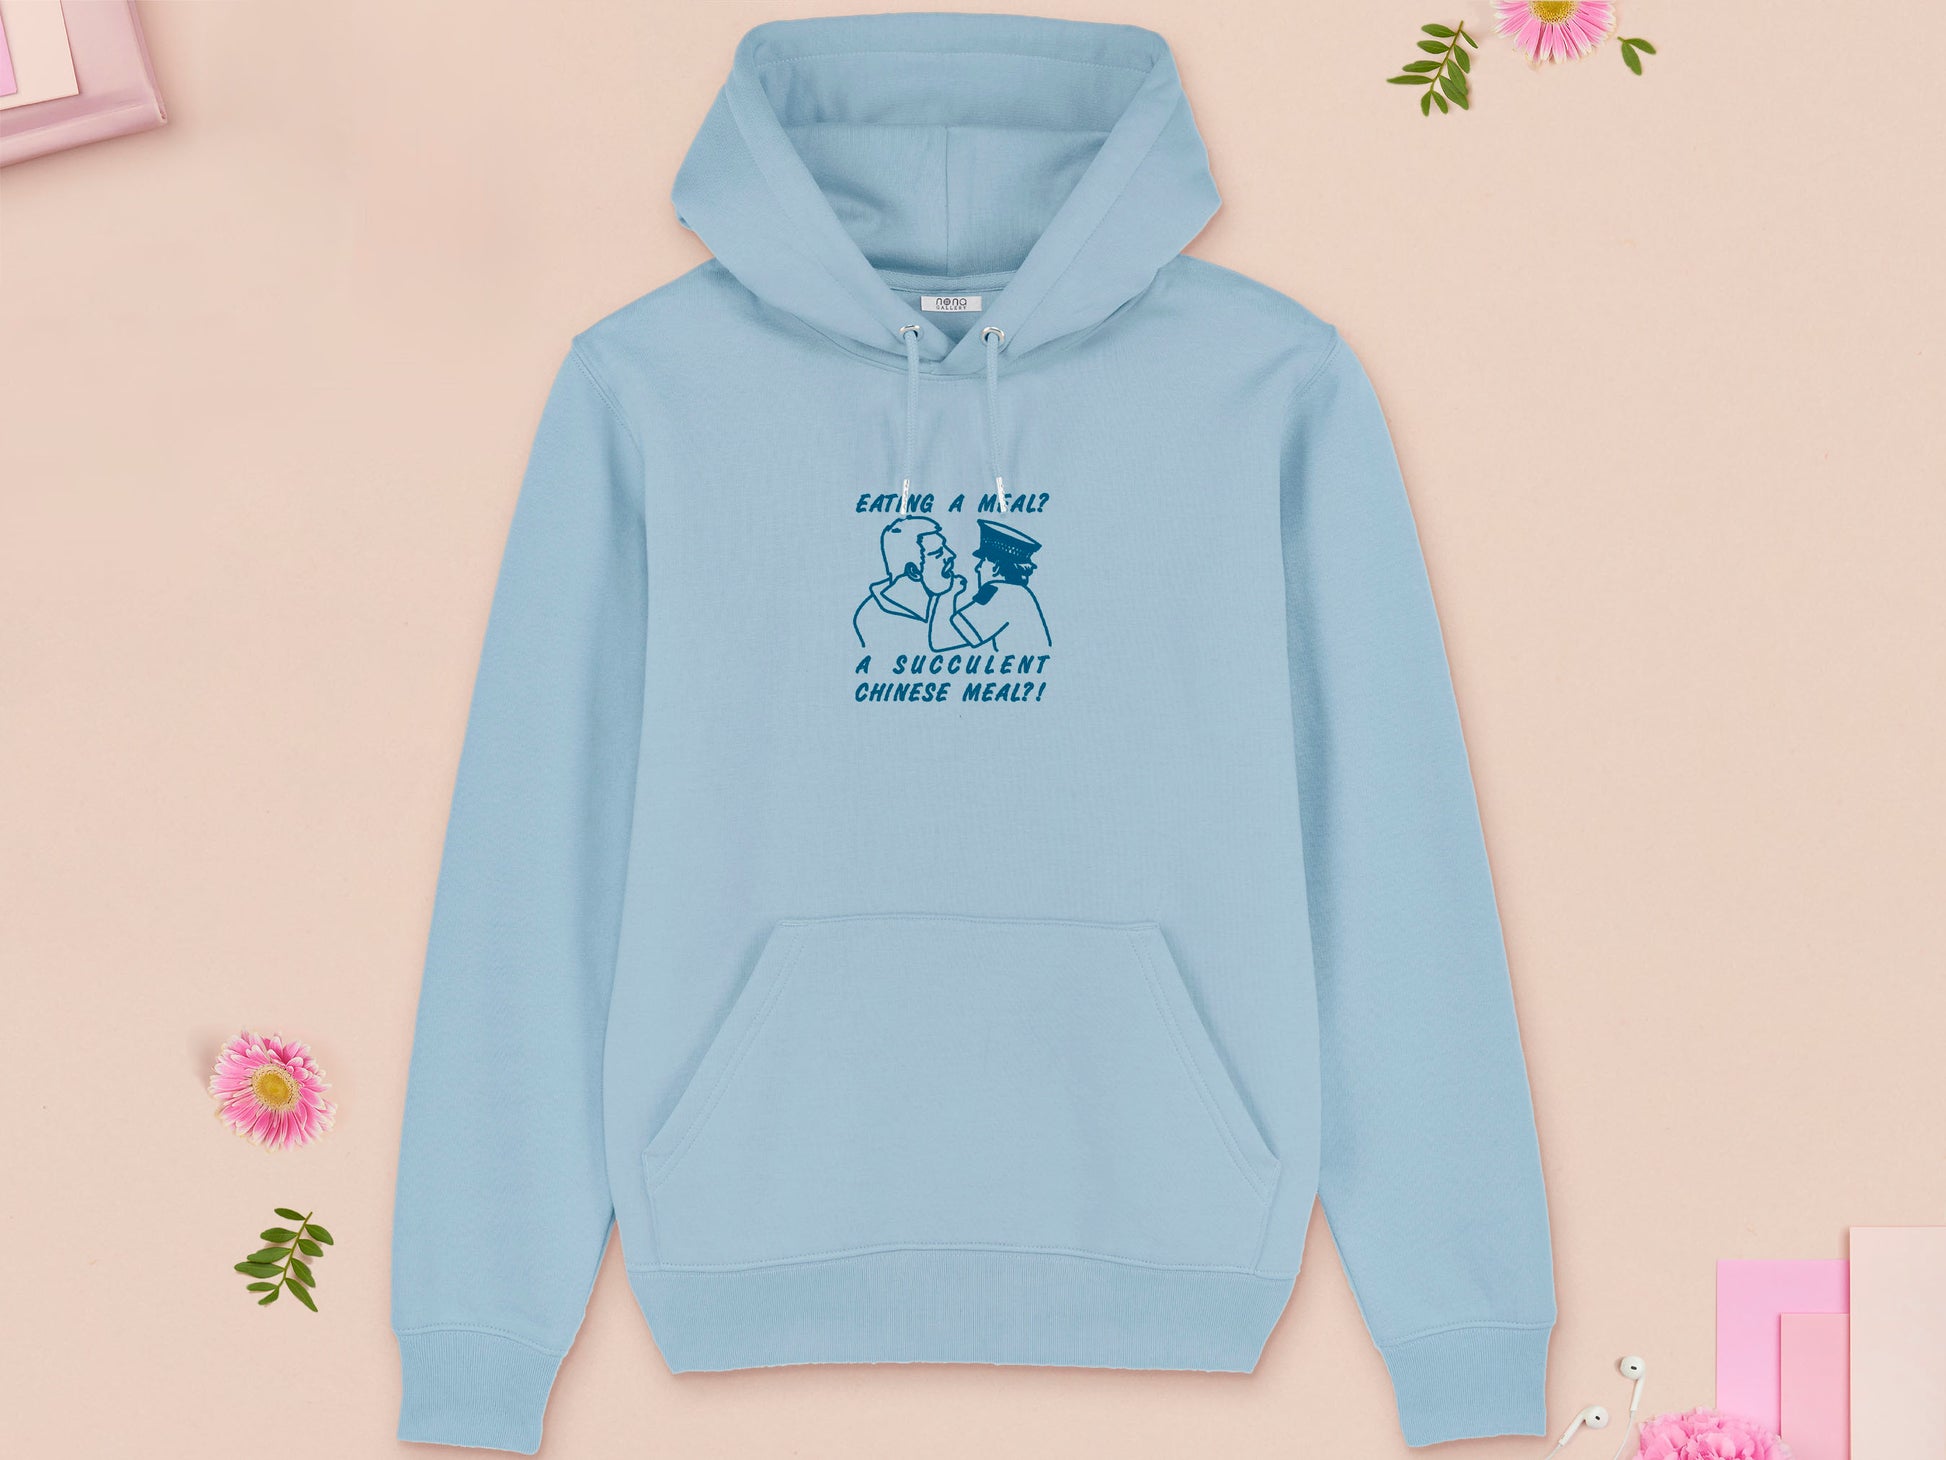 A blue long sleeve fleece hoodie, with an embroidered blue thread design of the viral democracy manifest video of Charles Dozsa being arrested by a policeman with the text reading Eating A Meal? A Succulent Chinese Meal?!